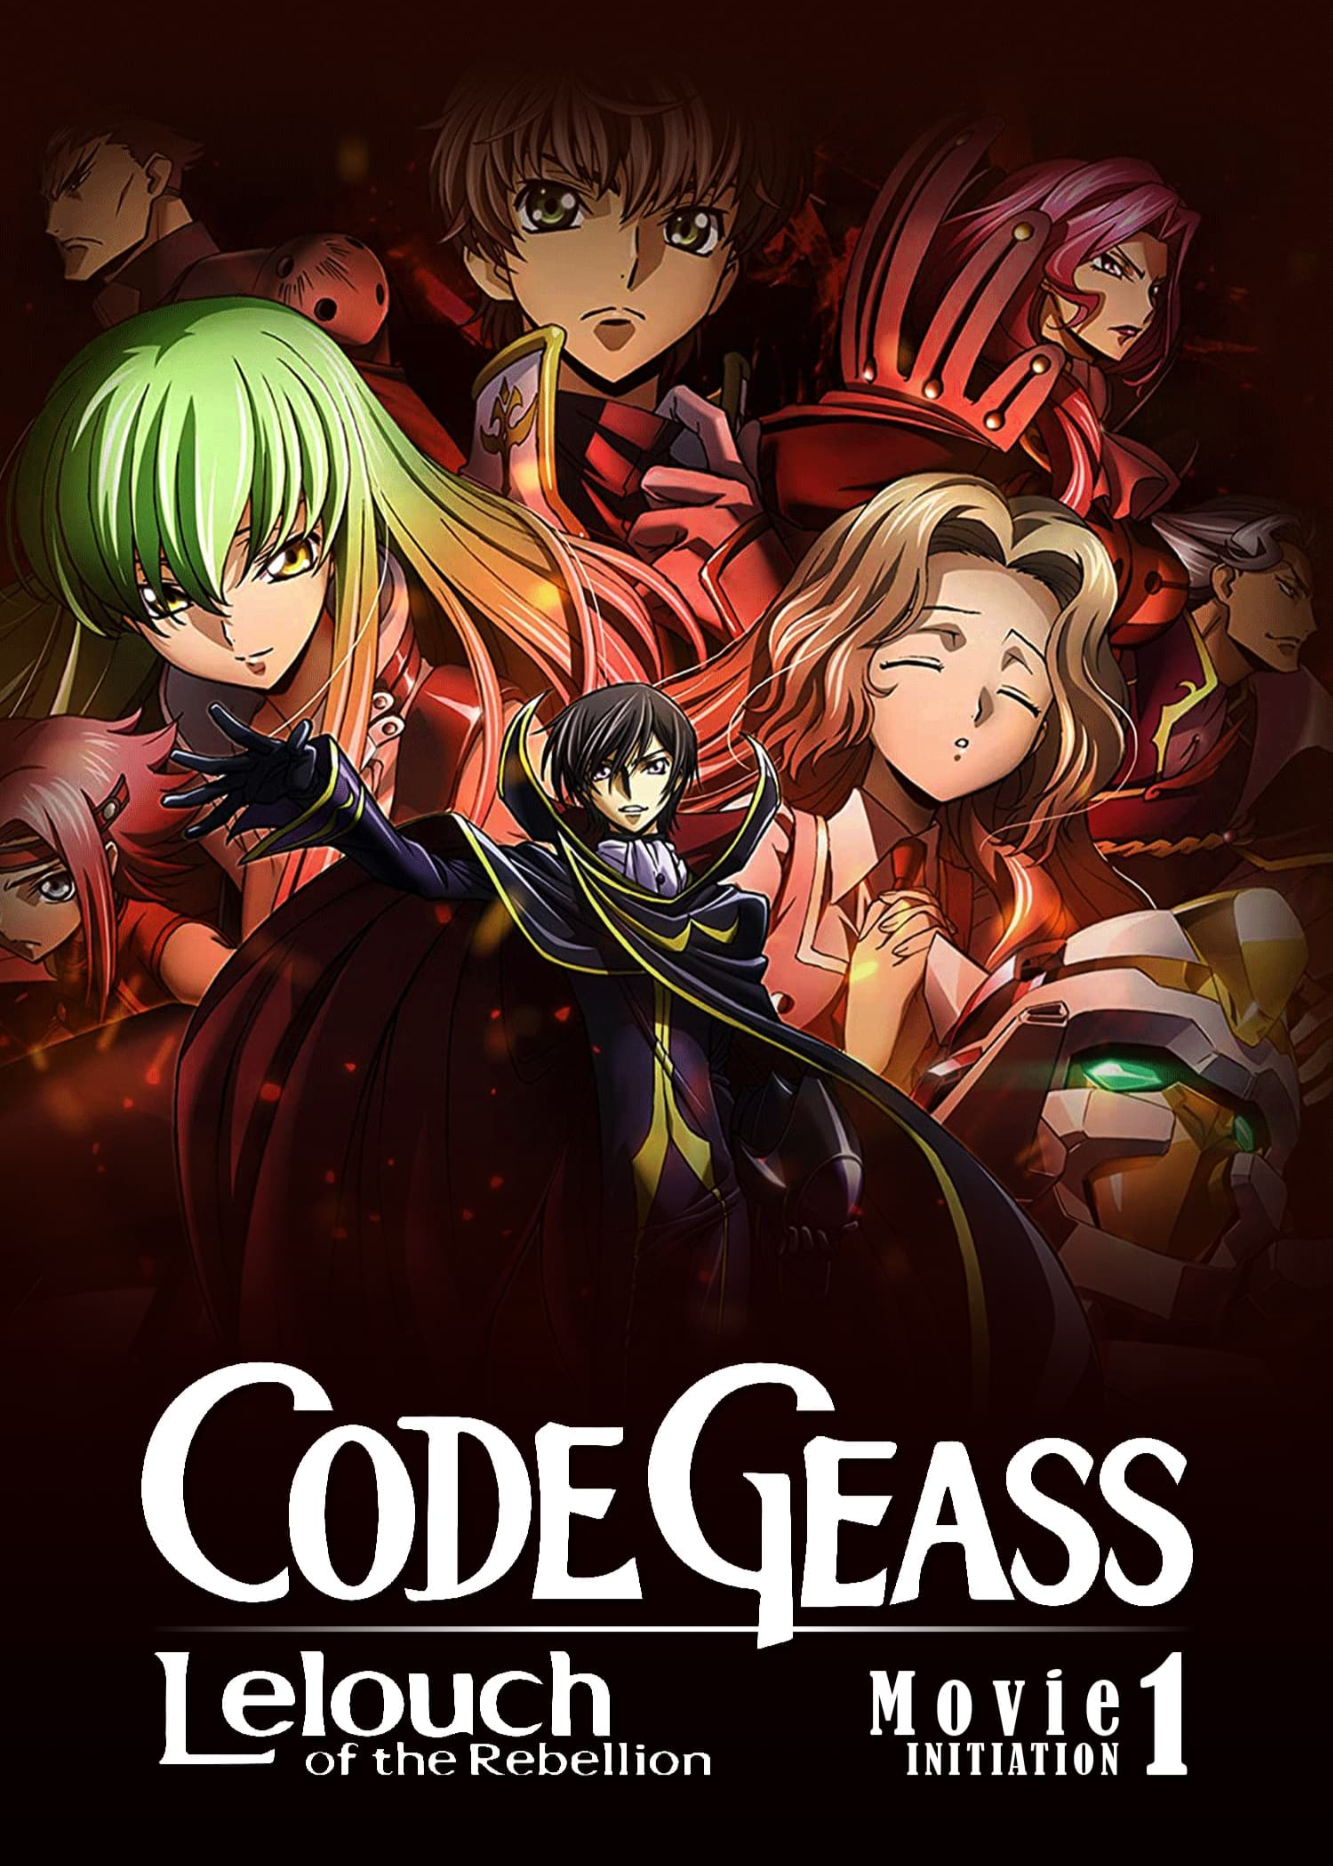 Poster Phim Code Geass: Lelouch of the Rebellion I - Initiation (Code Geass: Lelouch of the Rebellion I - Initiation)